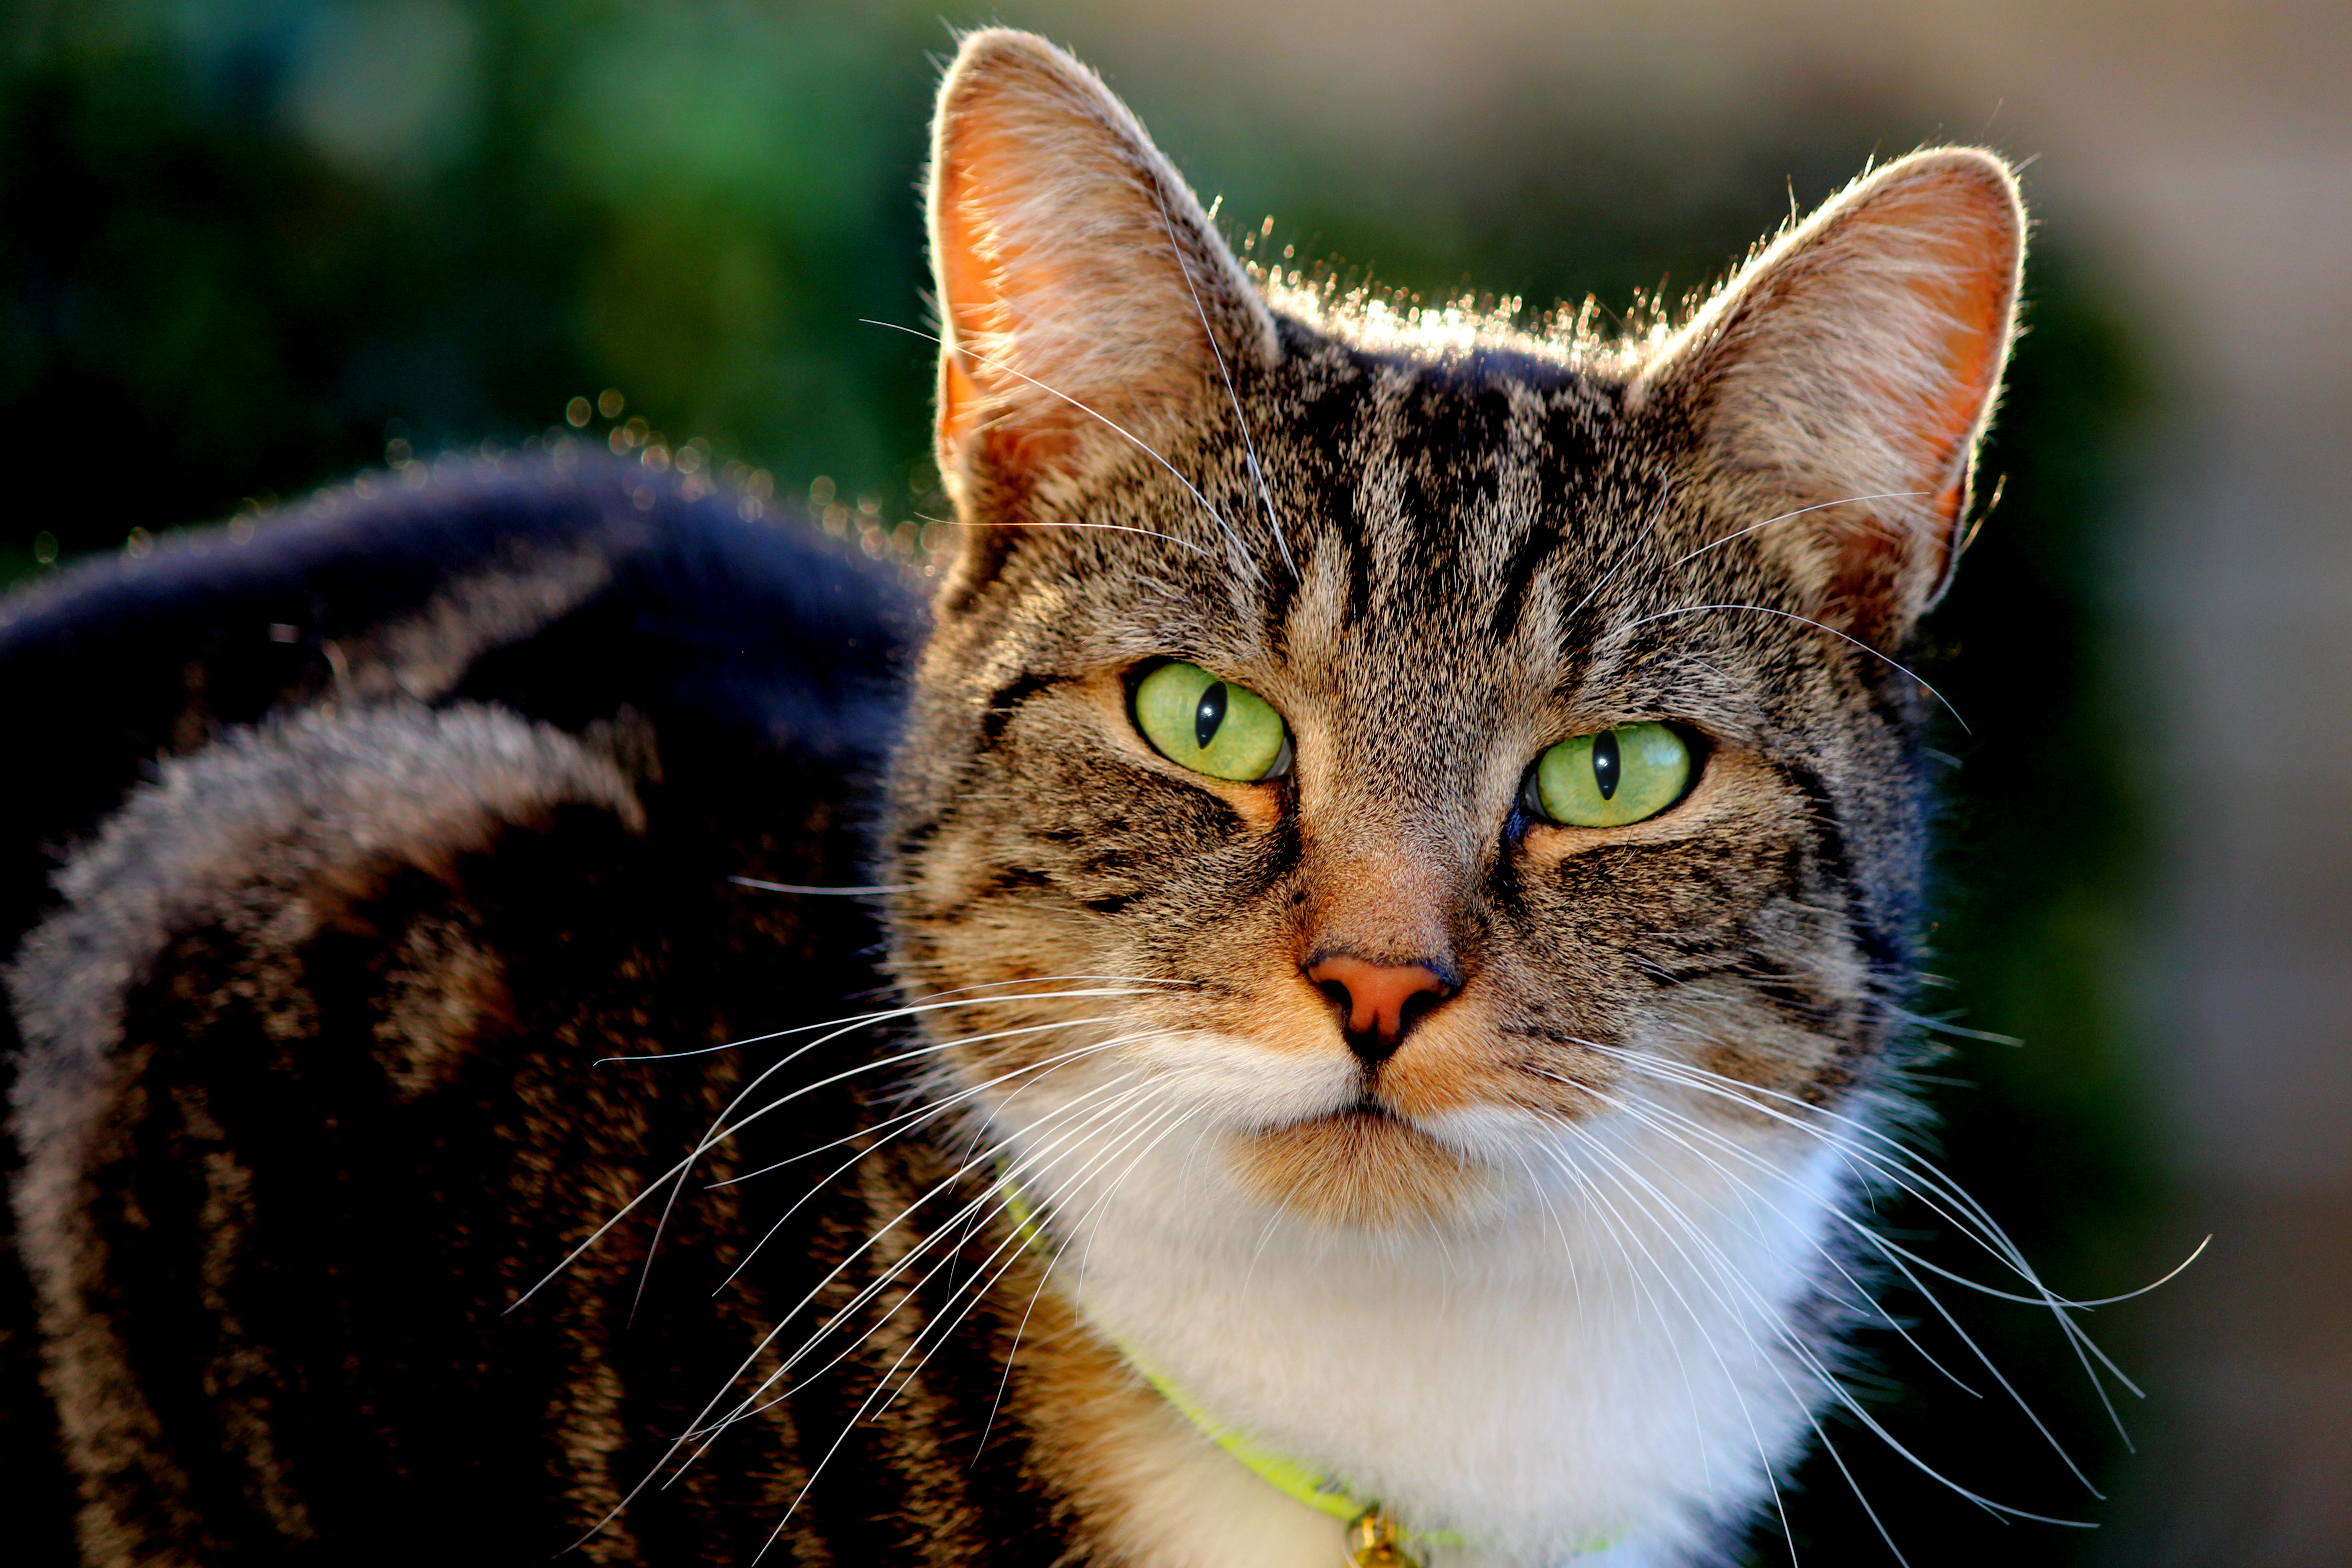 Close up of the face of Arthur, a tabby cat - copyright Susanna Braswell